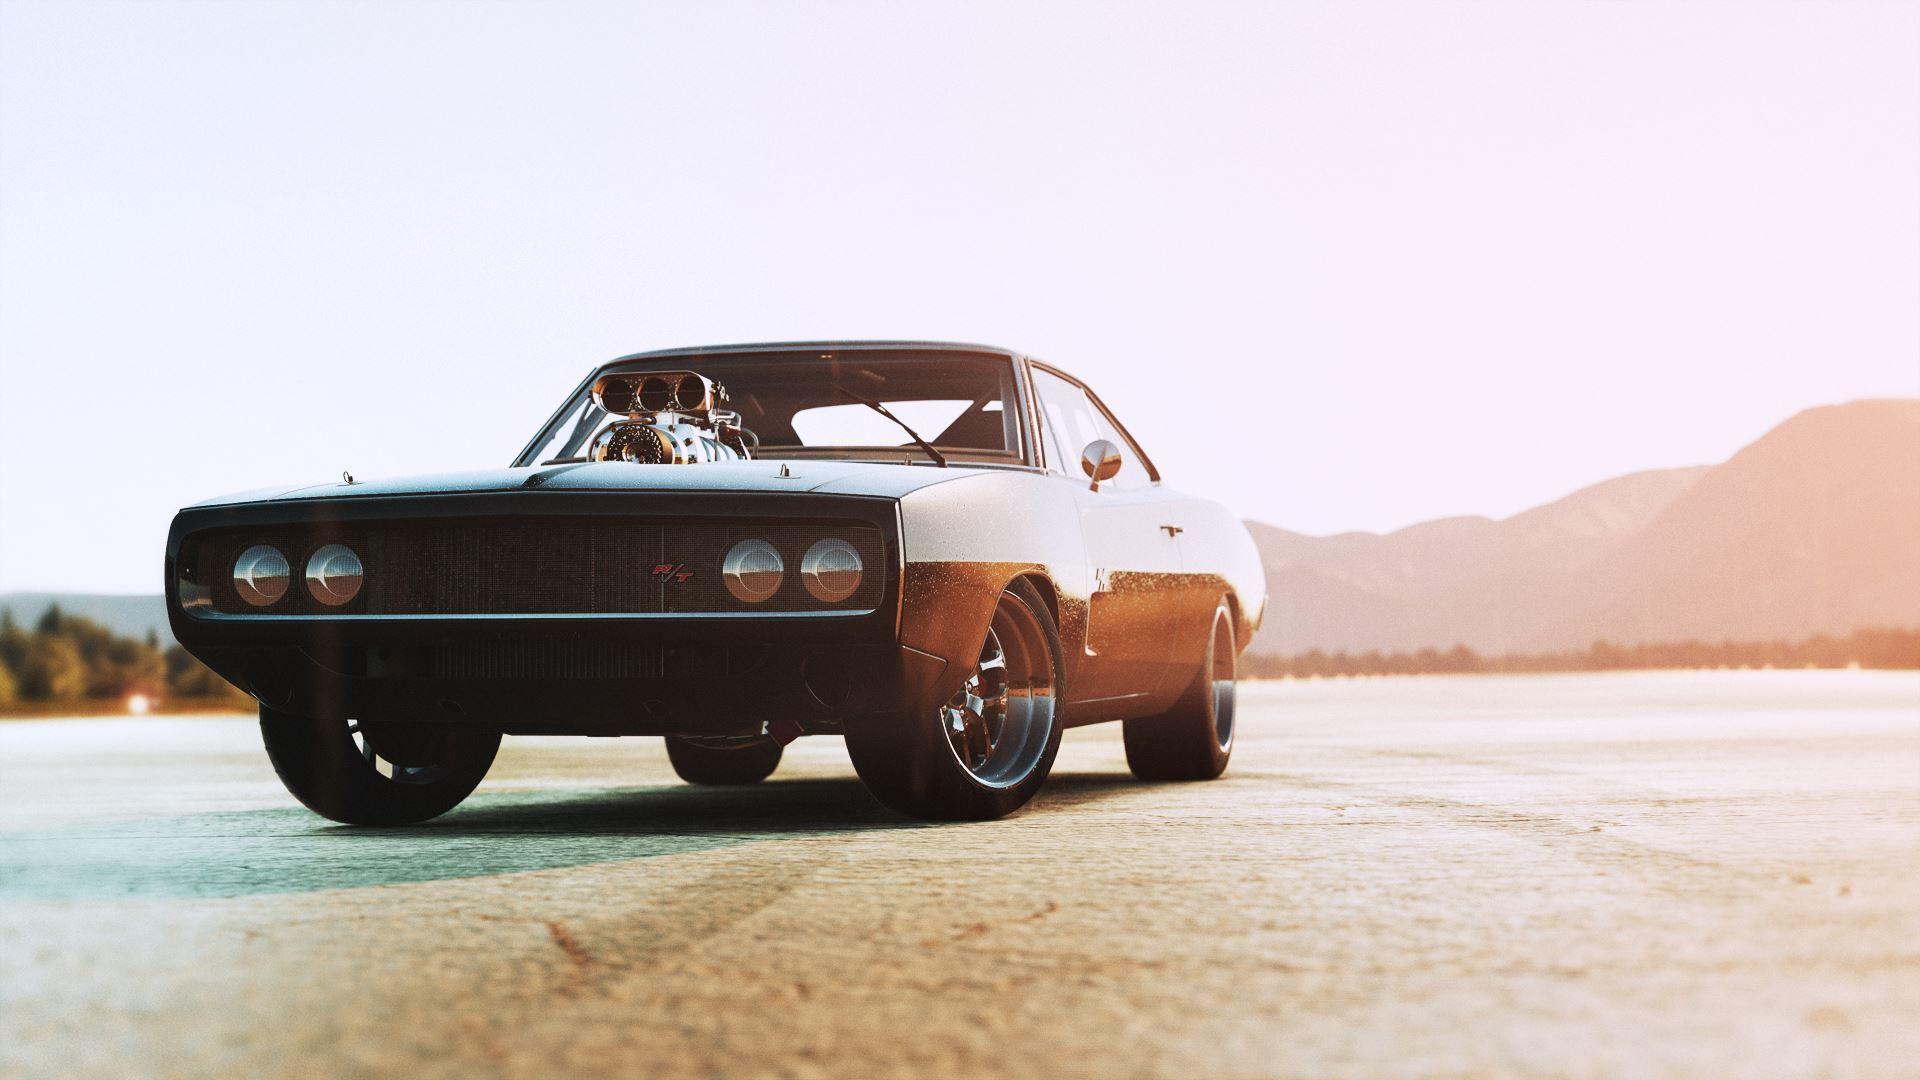 Dodge Charger R T Fast And Furious Edition Full HD Wallpaper